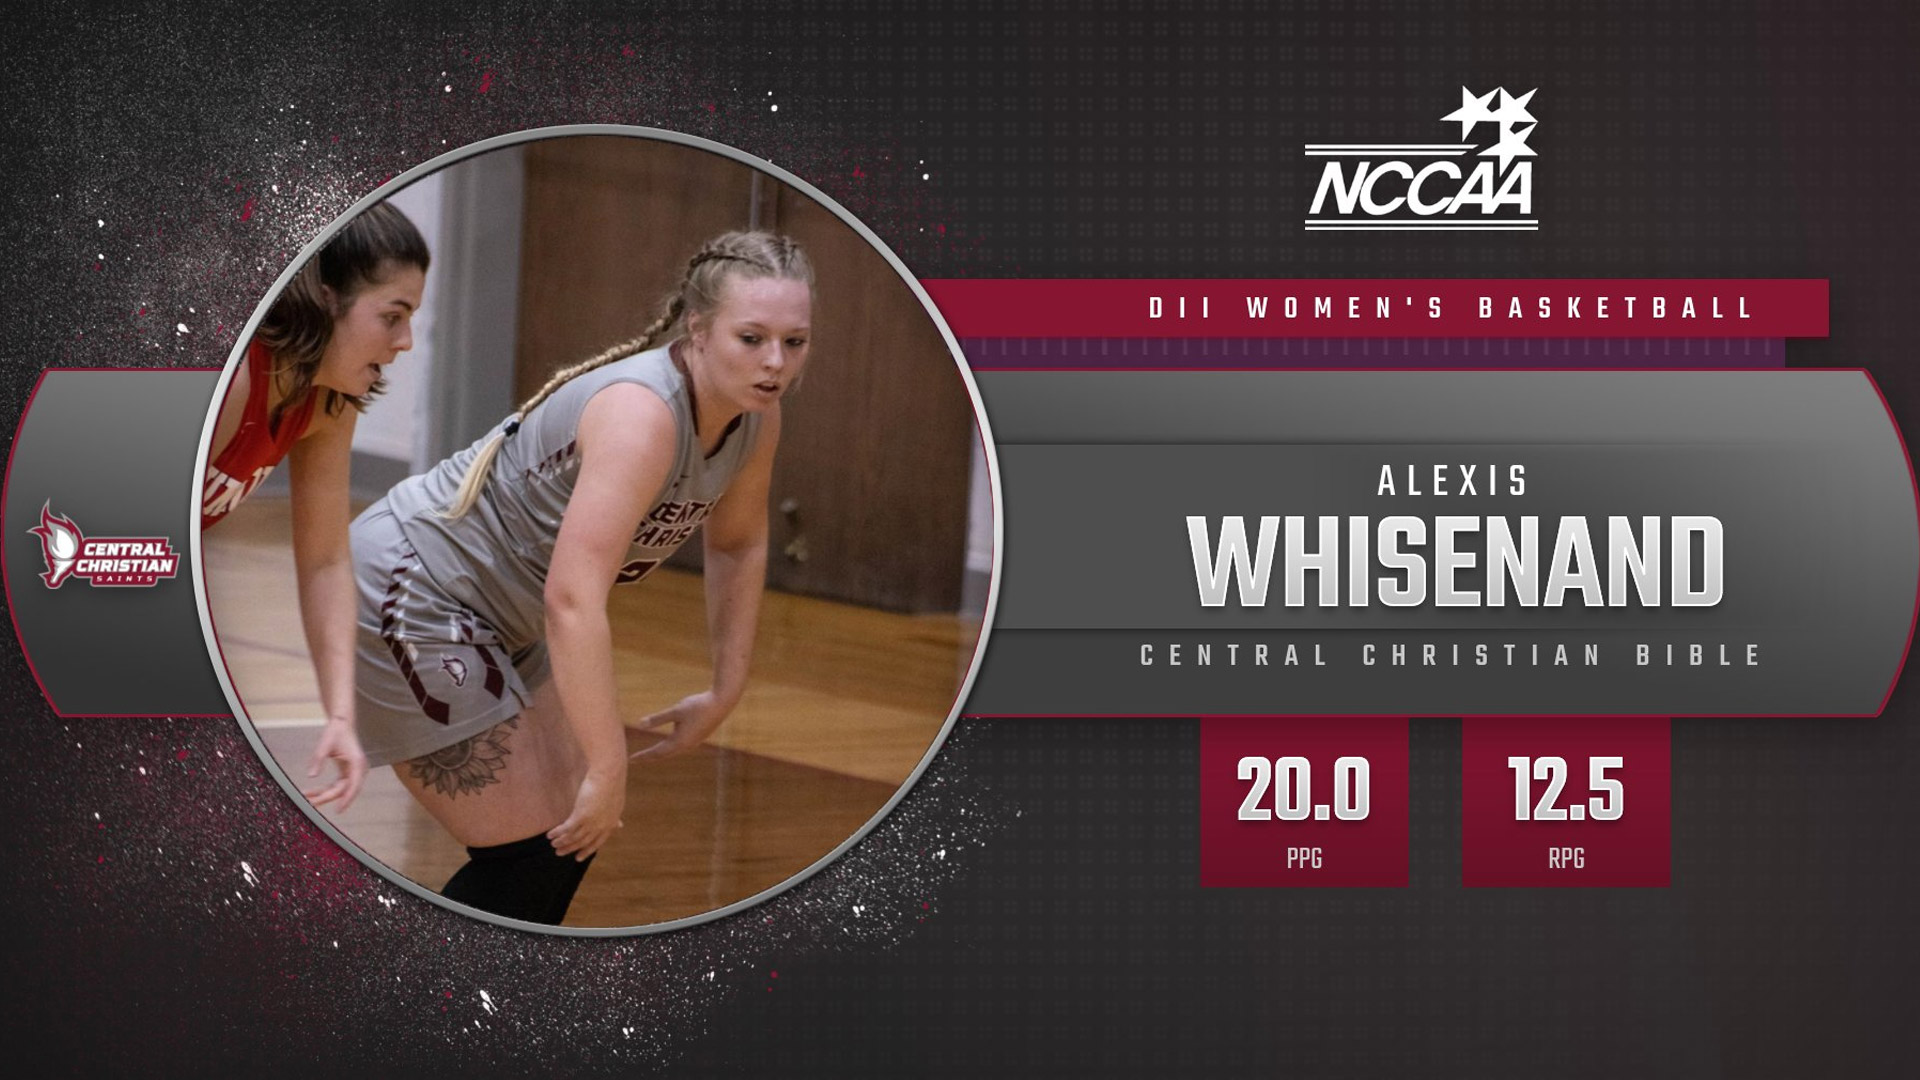 Junior guard Alexis Whisenand was named NCCAA Women's Basketball Division II Student-Athlete of the Week on Monday, Feb. 14.